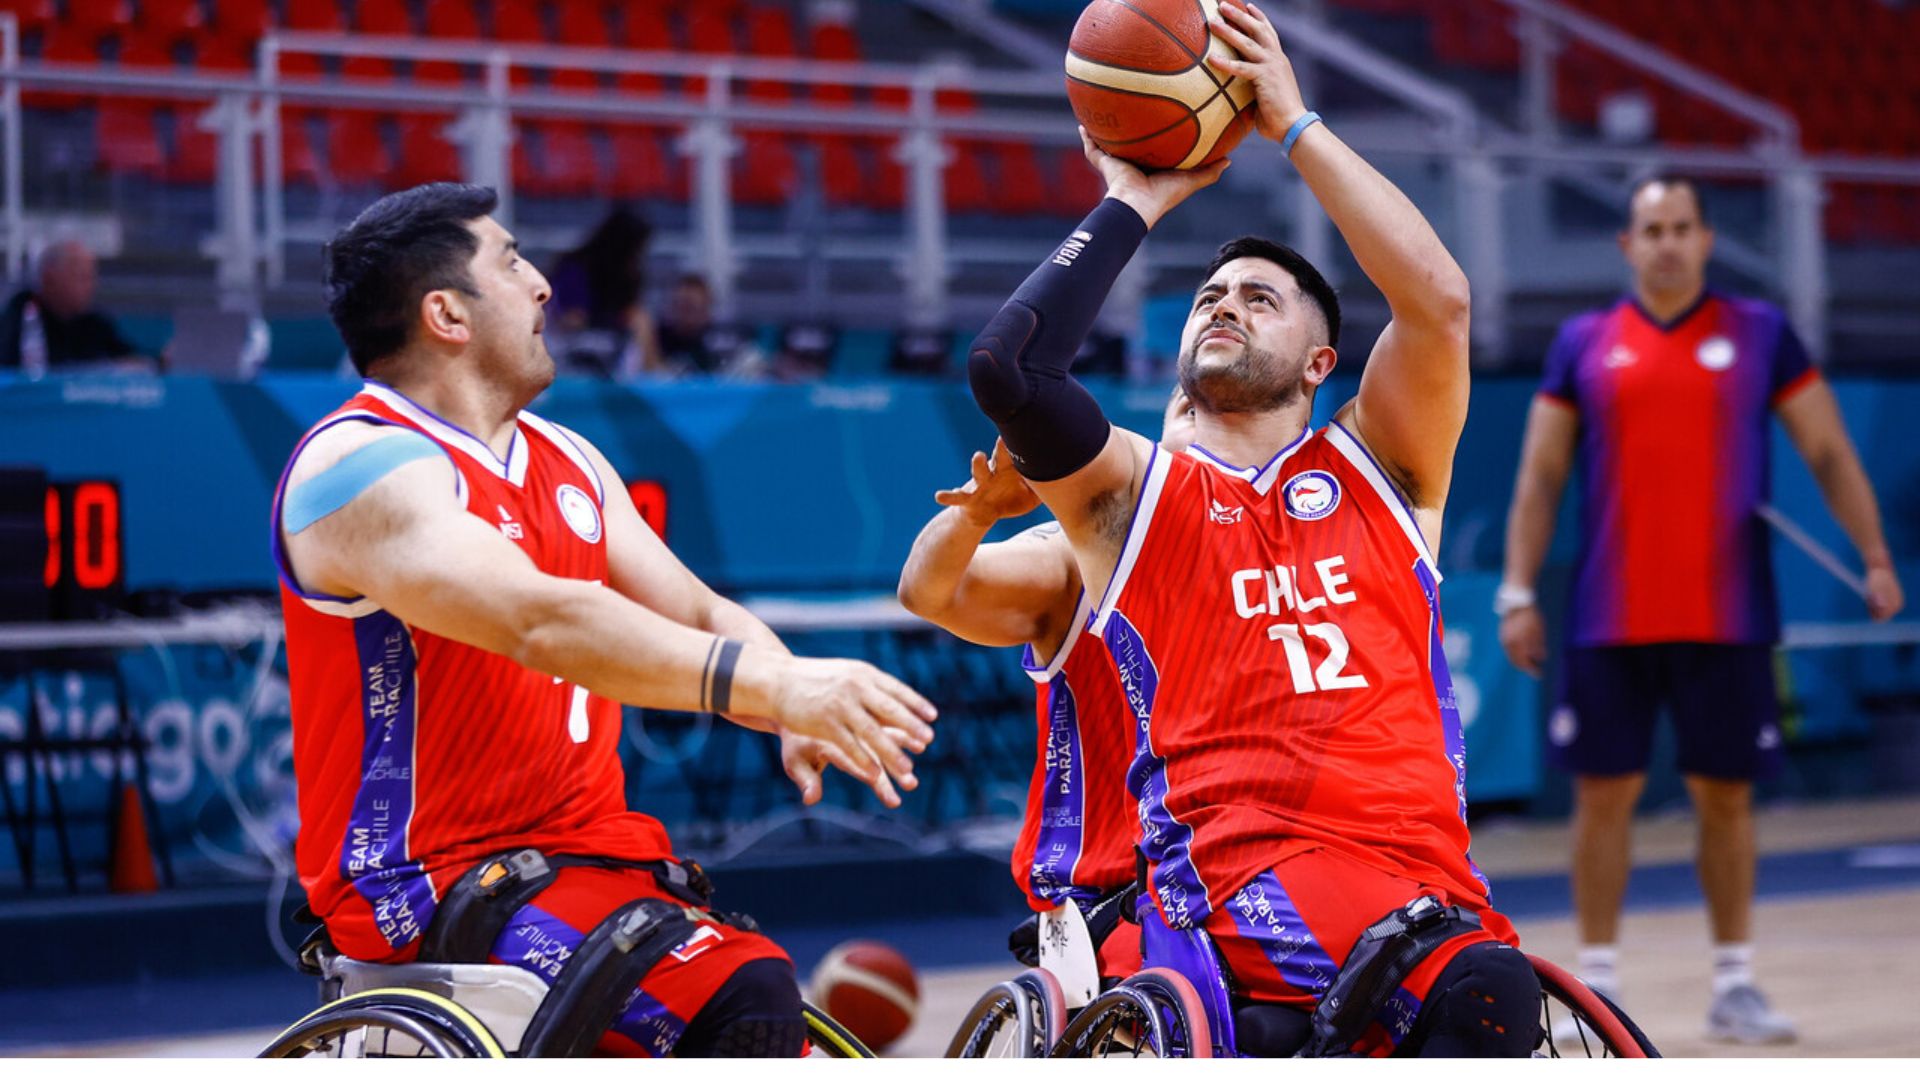 Sports Explainer: Wheelchair Basketball, Judo, and Para Powerlifting